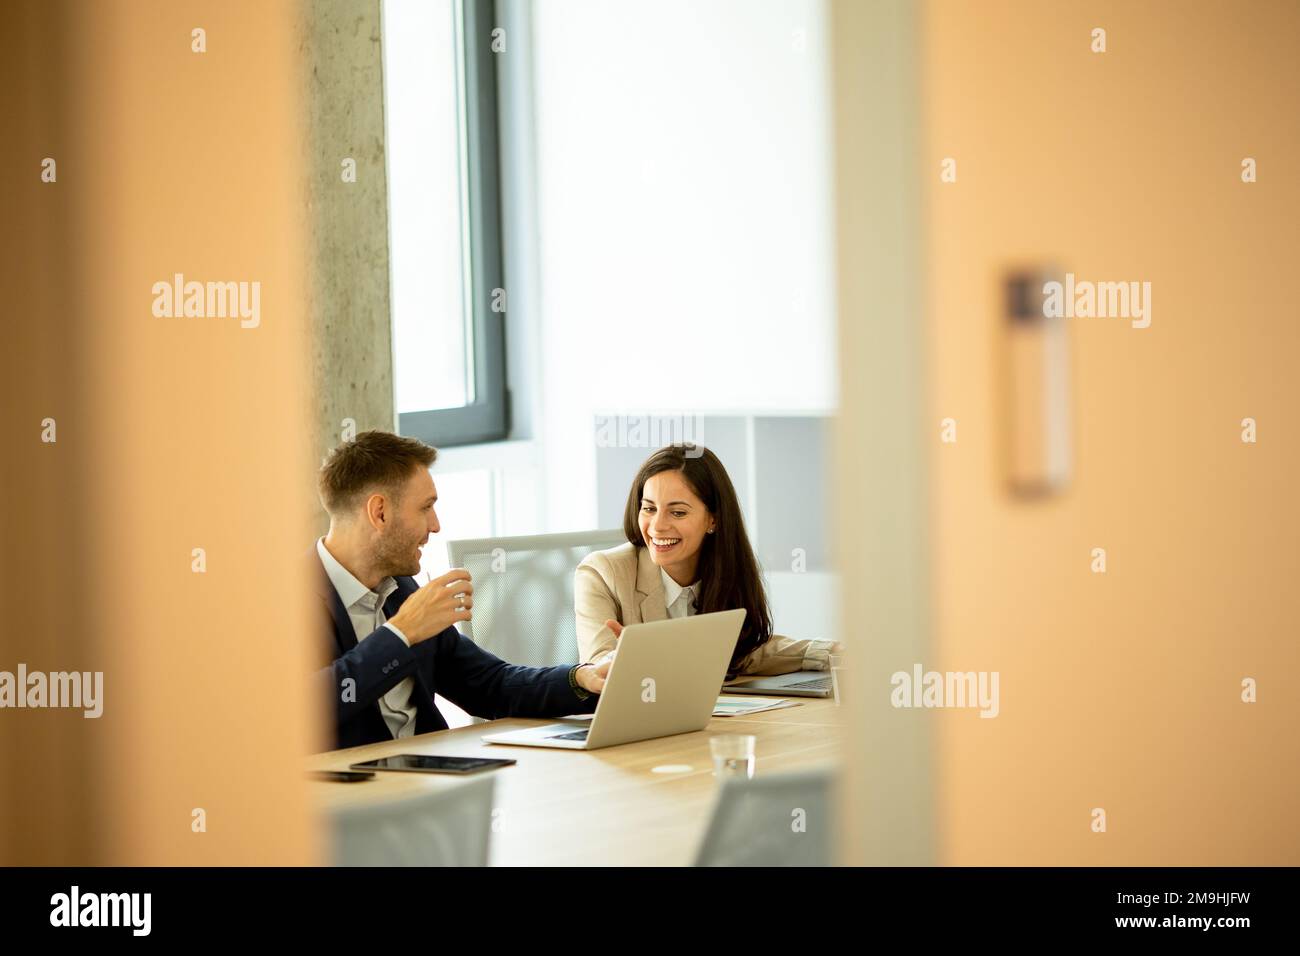 Businessman and businesswoman working together in office Stock Photo